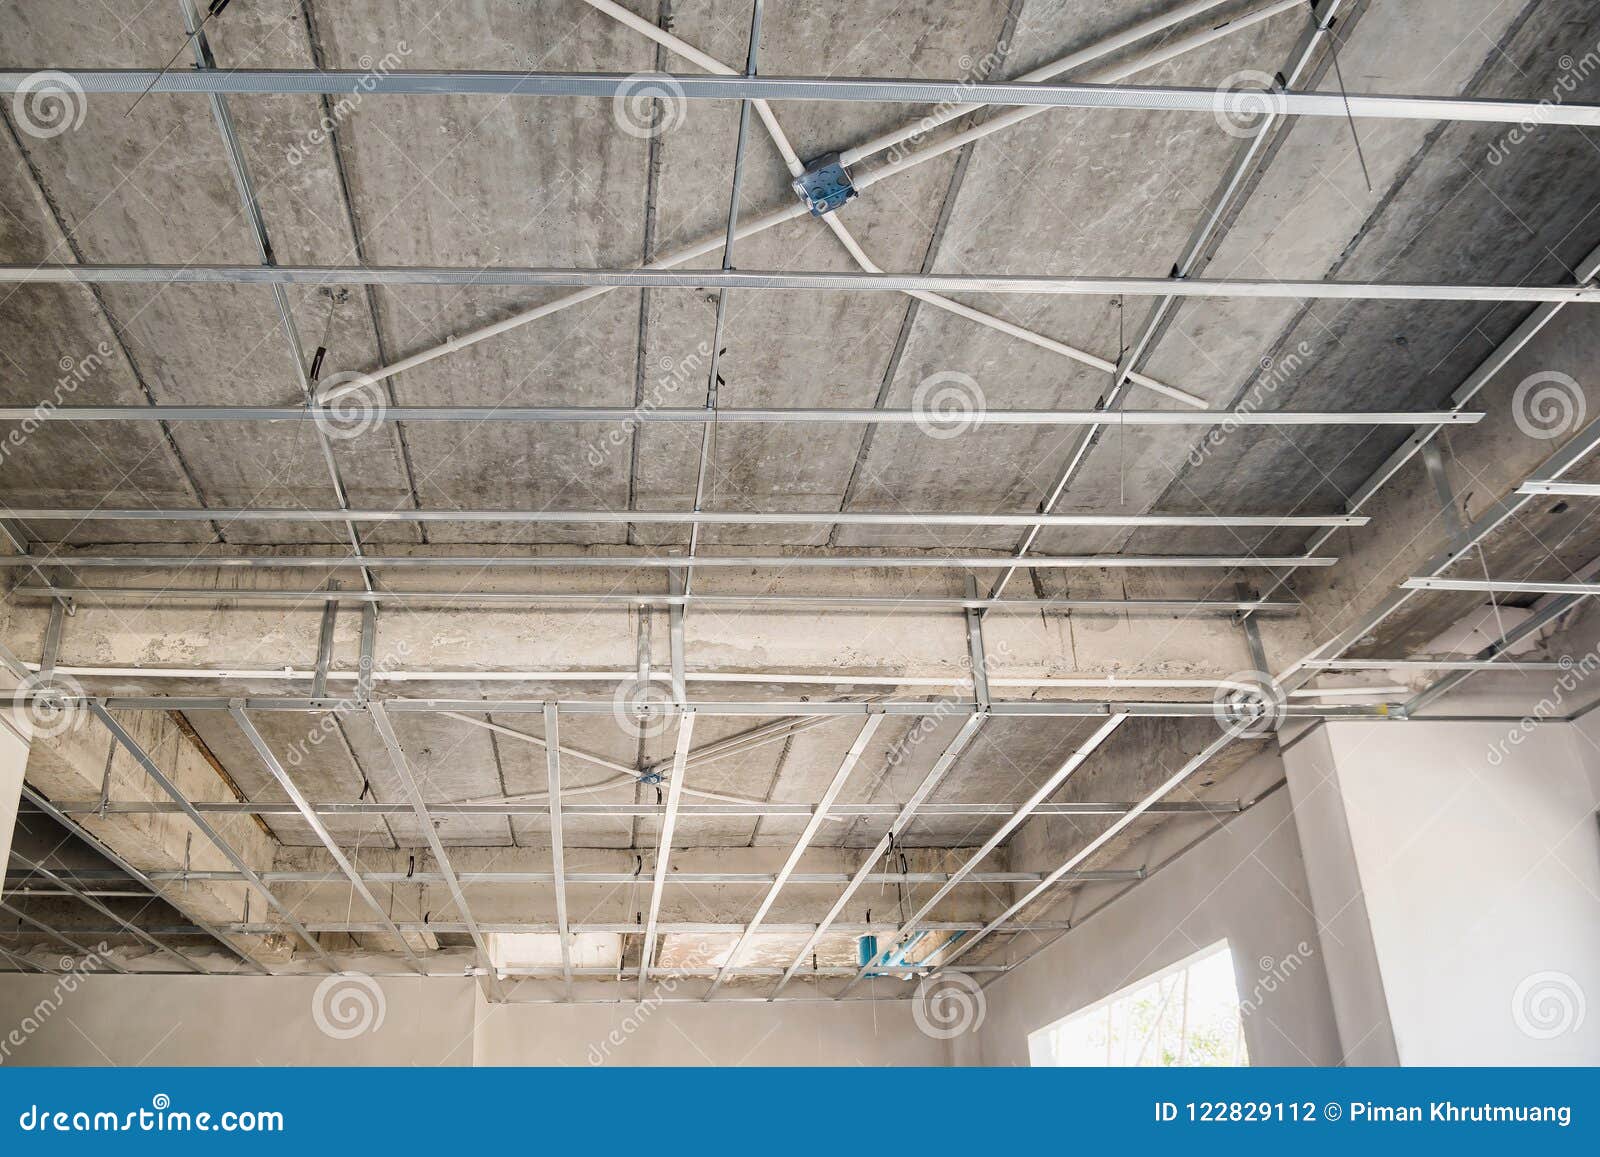 Install Metal Frame For Plaster Board Ceiling At House Stock